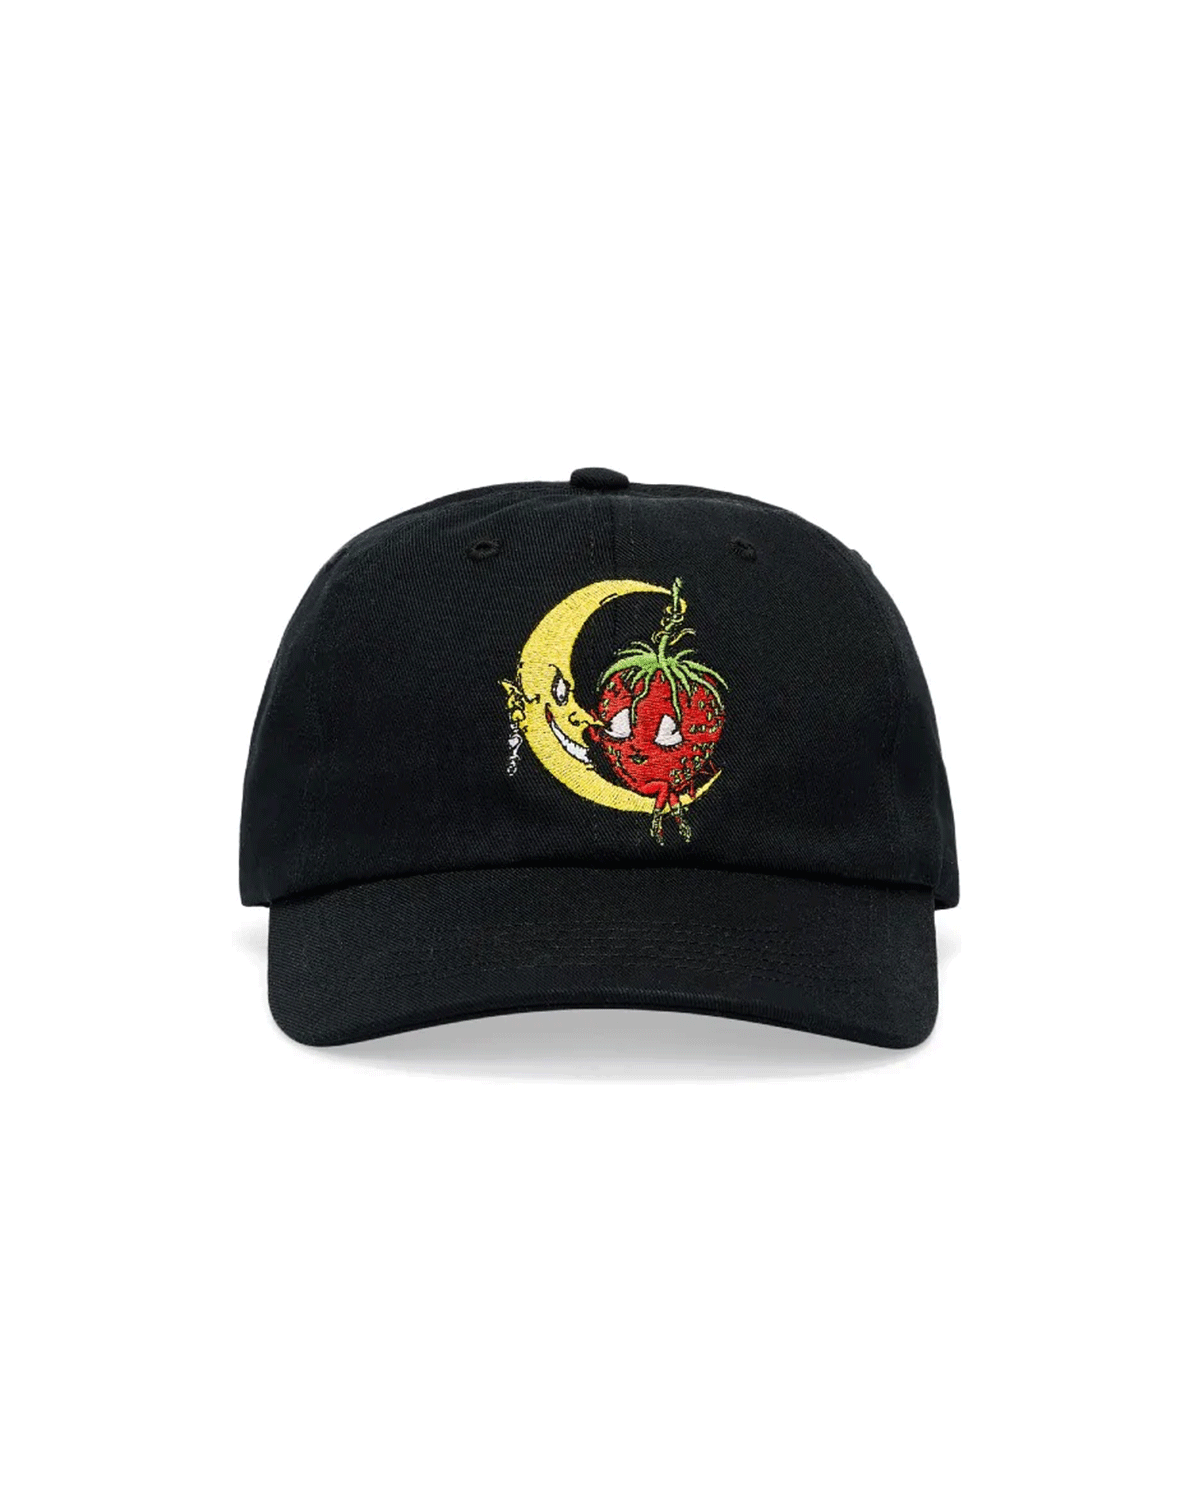 SHF Embroidered Six Panel Cap Woven Black